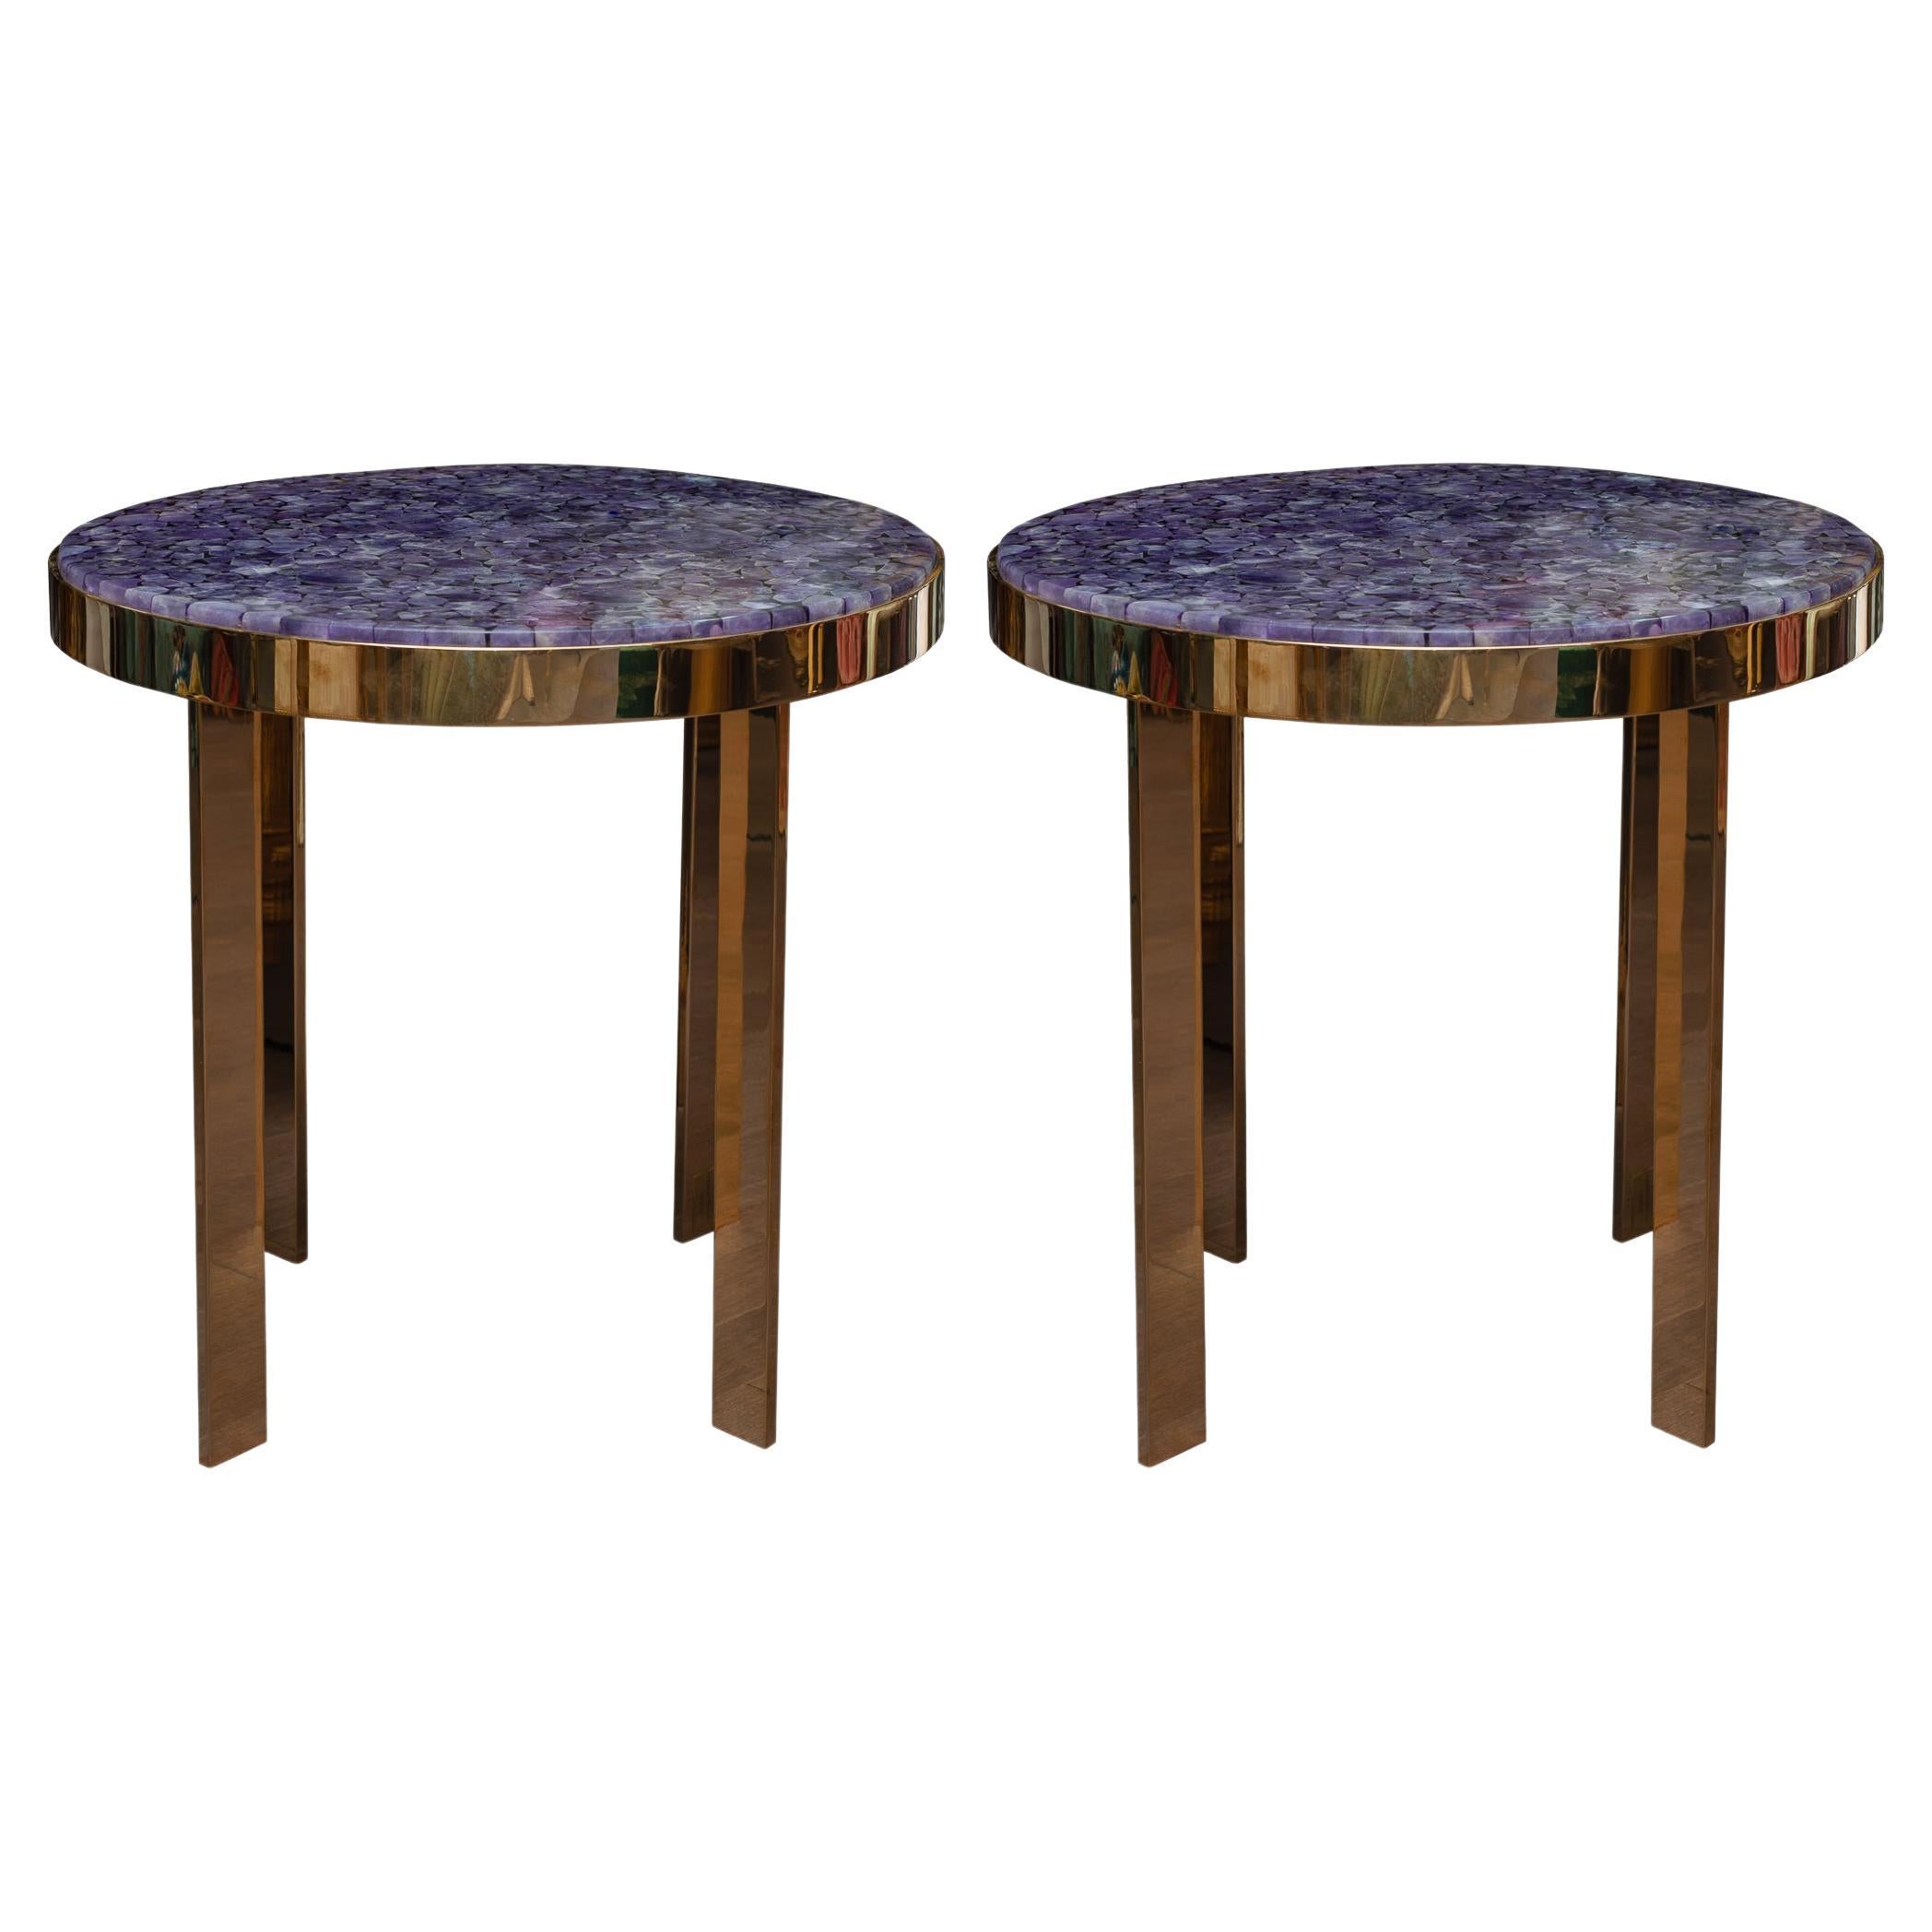 Introducing the latest arrival to our Studio Maison Nurita collection of signed custom metal tables. These magnificent Amethyst stone tops were sourced in Paris. These midcentury inspired tables are hand forged in brass by Studio Maison Nurita’s